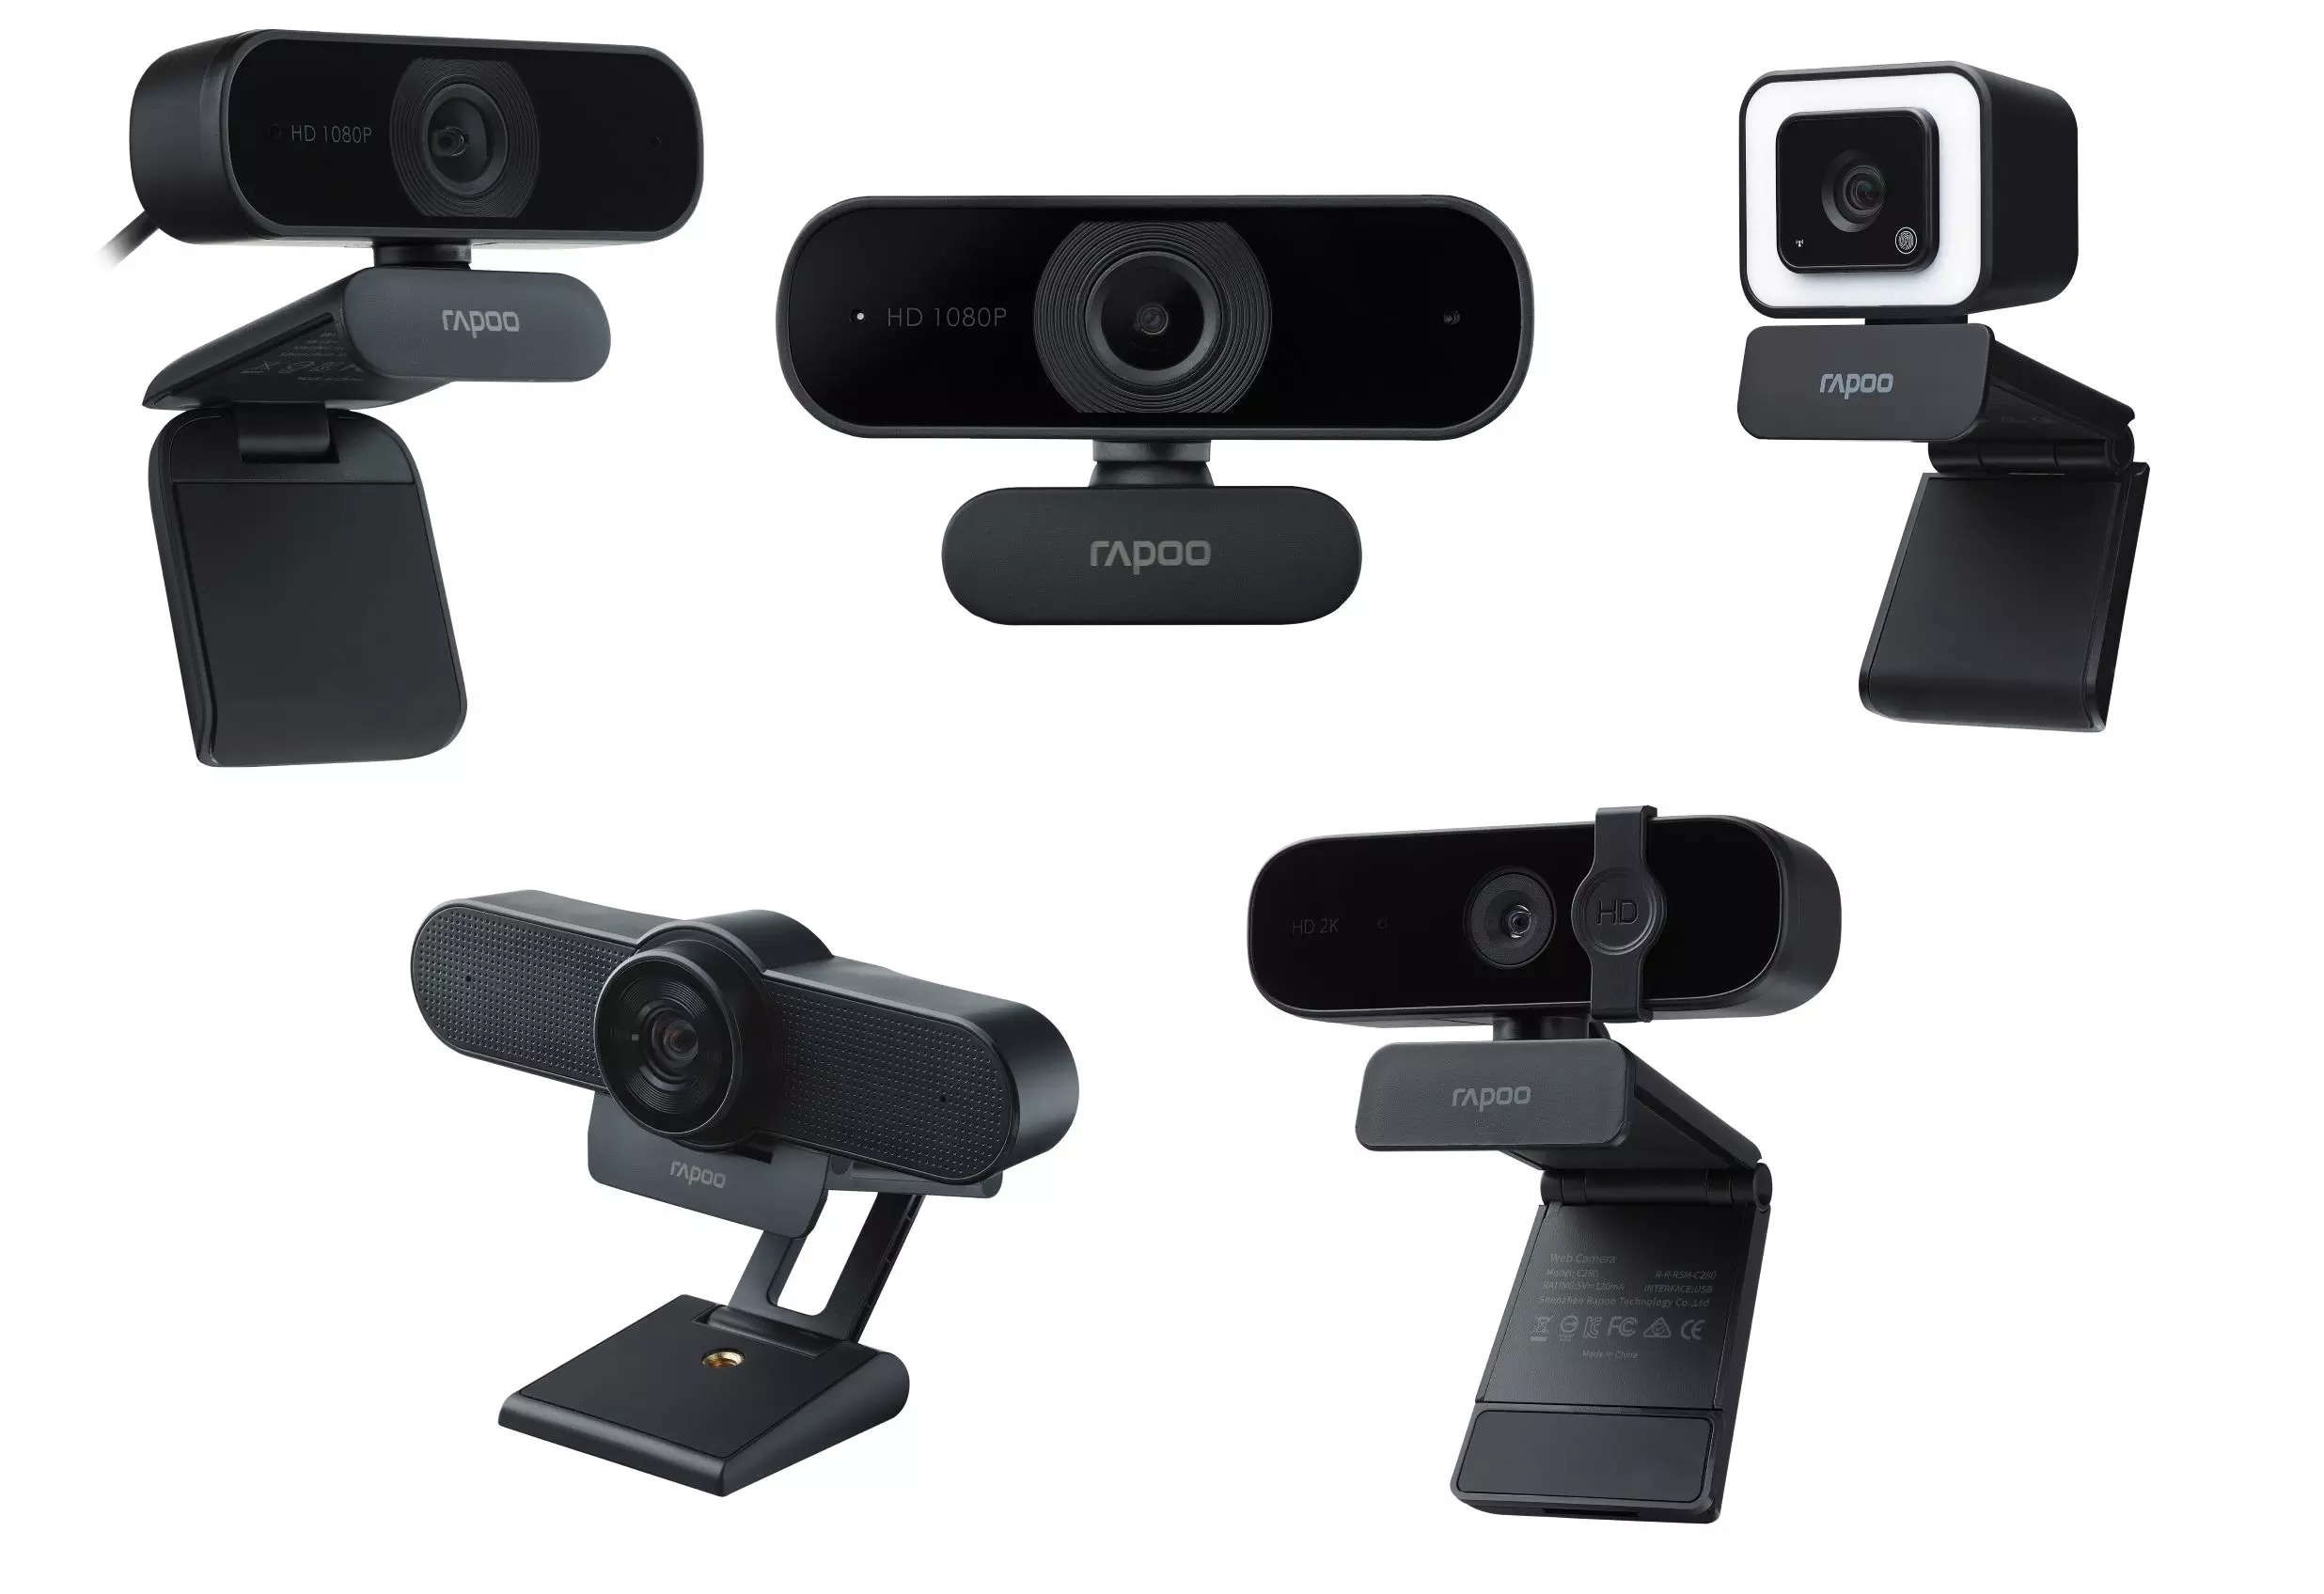 klassekammerat Døde i verden Centrum Rapoo has launched five new webcams with up to 4K resolution and dual noise  cancellation microphones in India, price starts at Rs 3,499 - Times of India